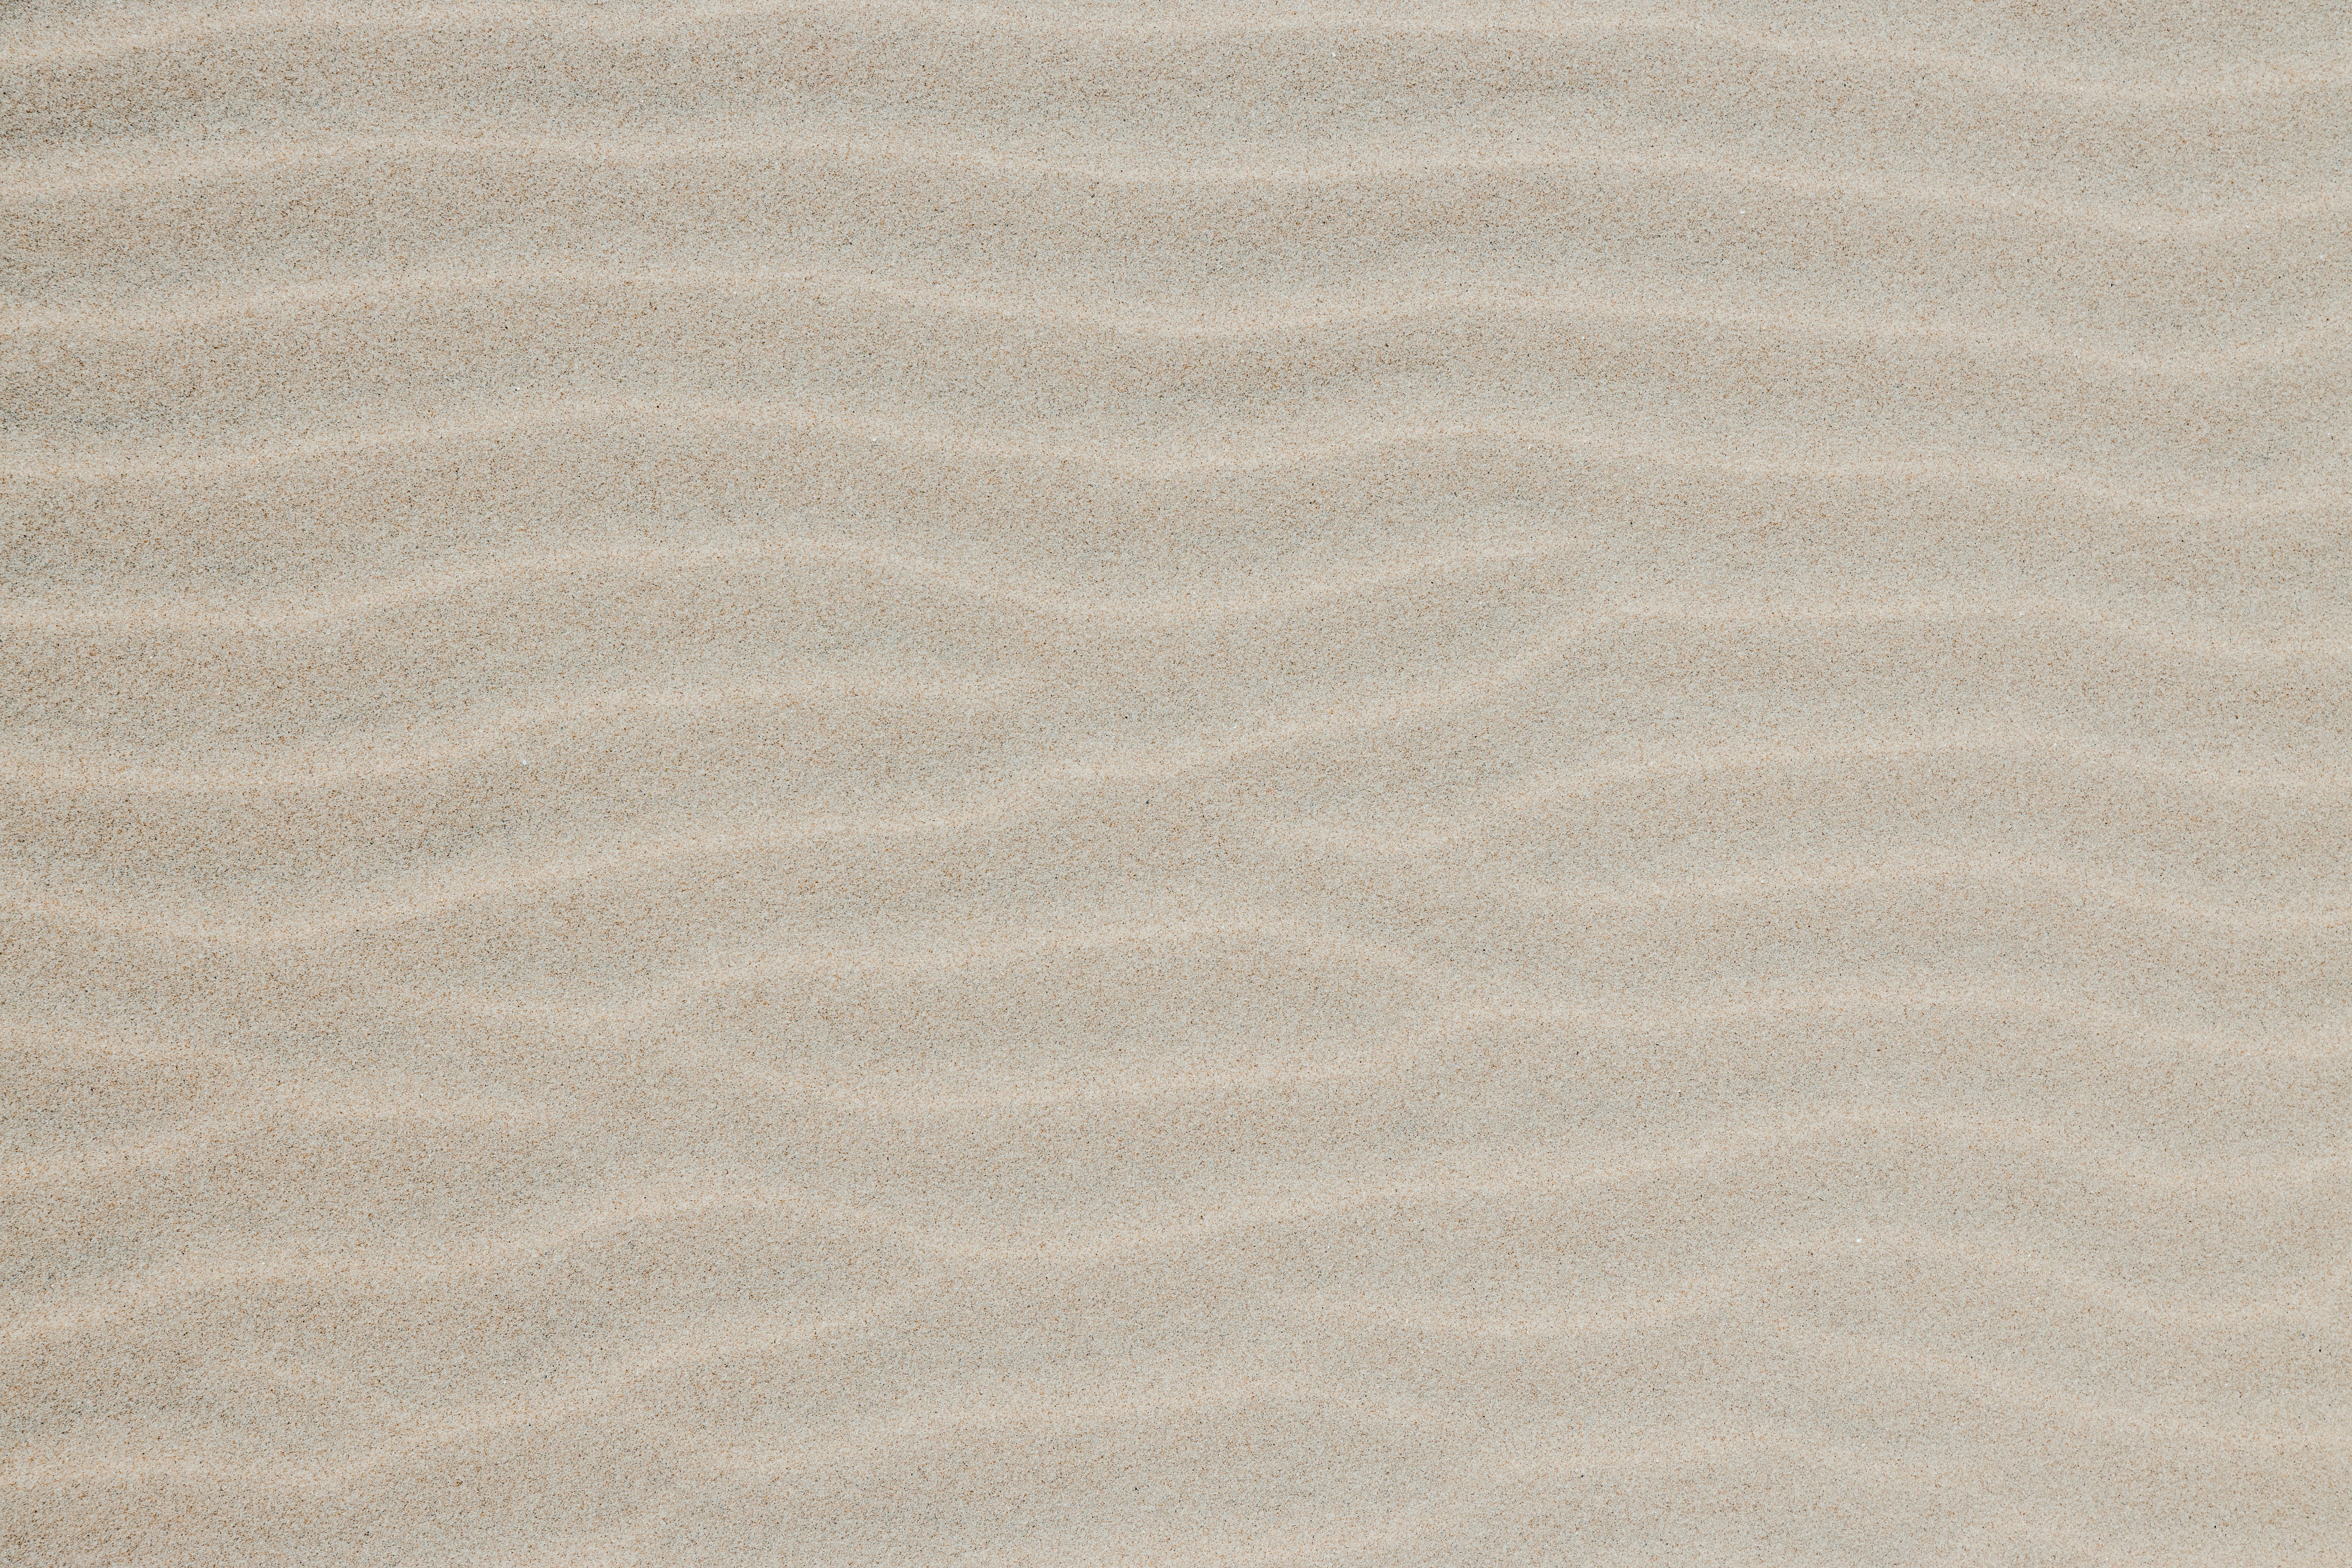 Top shot of some beach sand forming waves with pastel tones. Sand waves for texture background